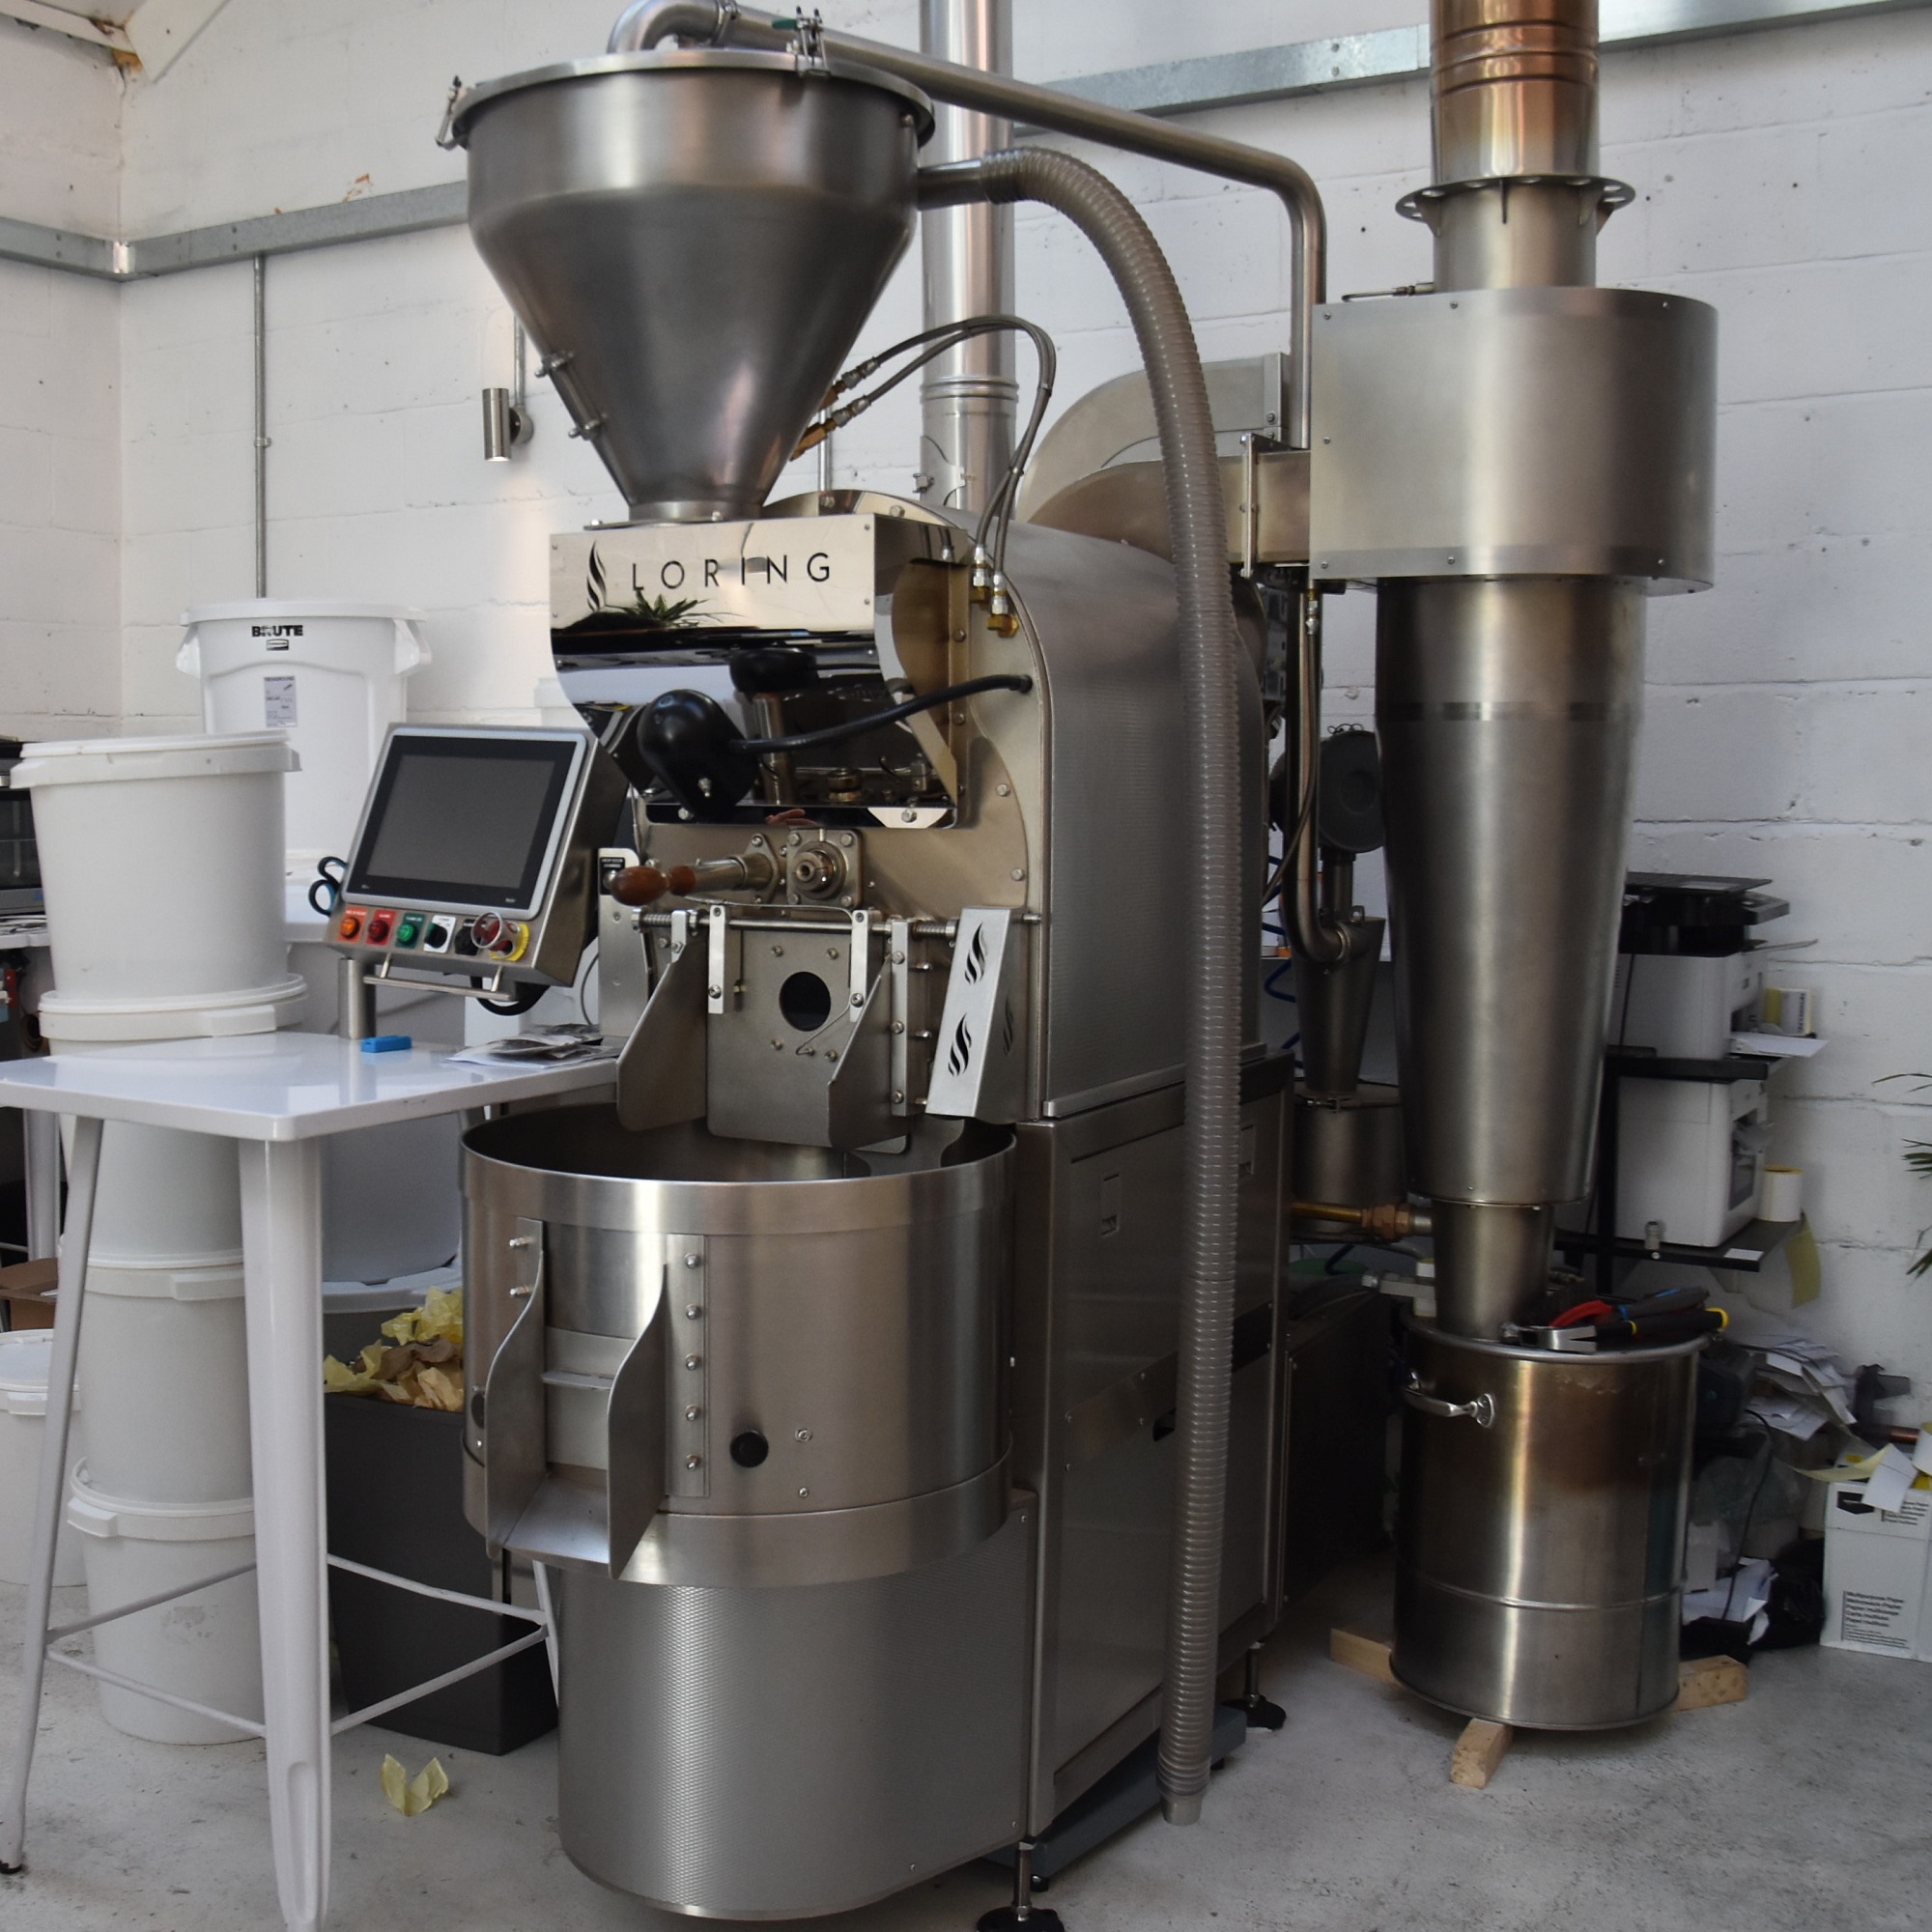 The Loring S15 Falcon roaster at the back of NewGround Coffee in Oxford.